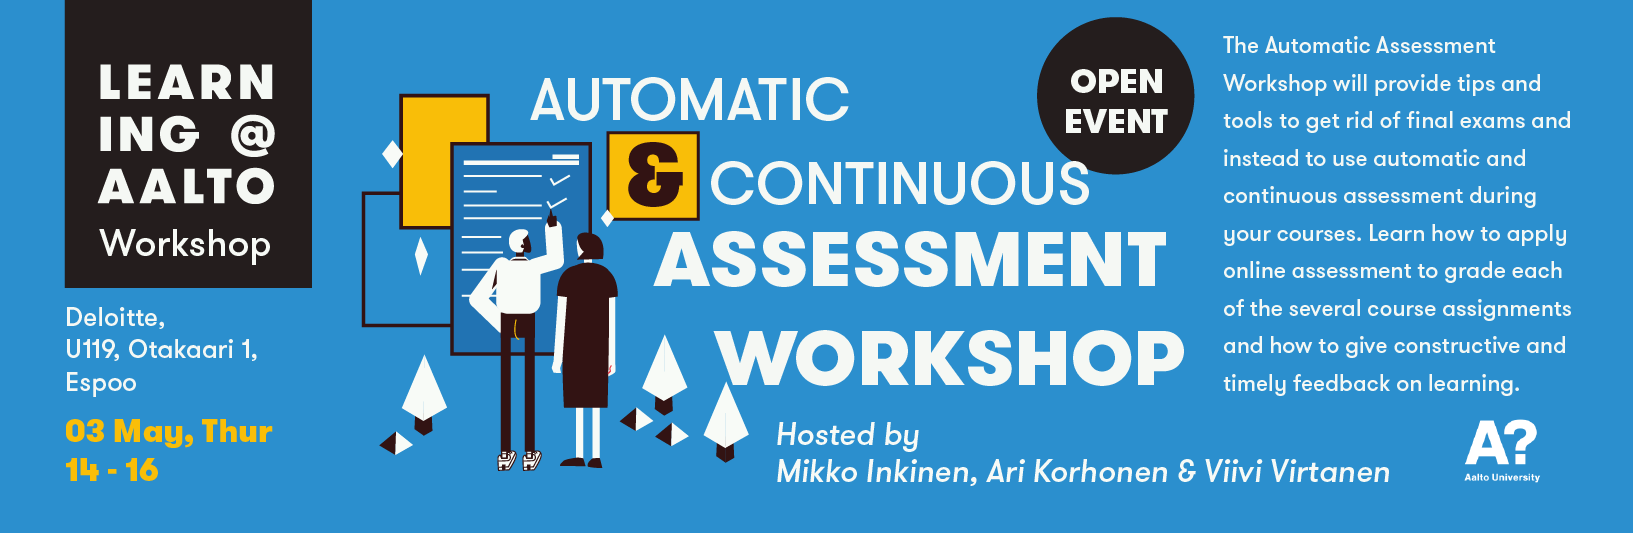 Automatic and Continuous Assessment Workshop